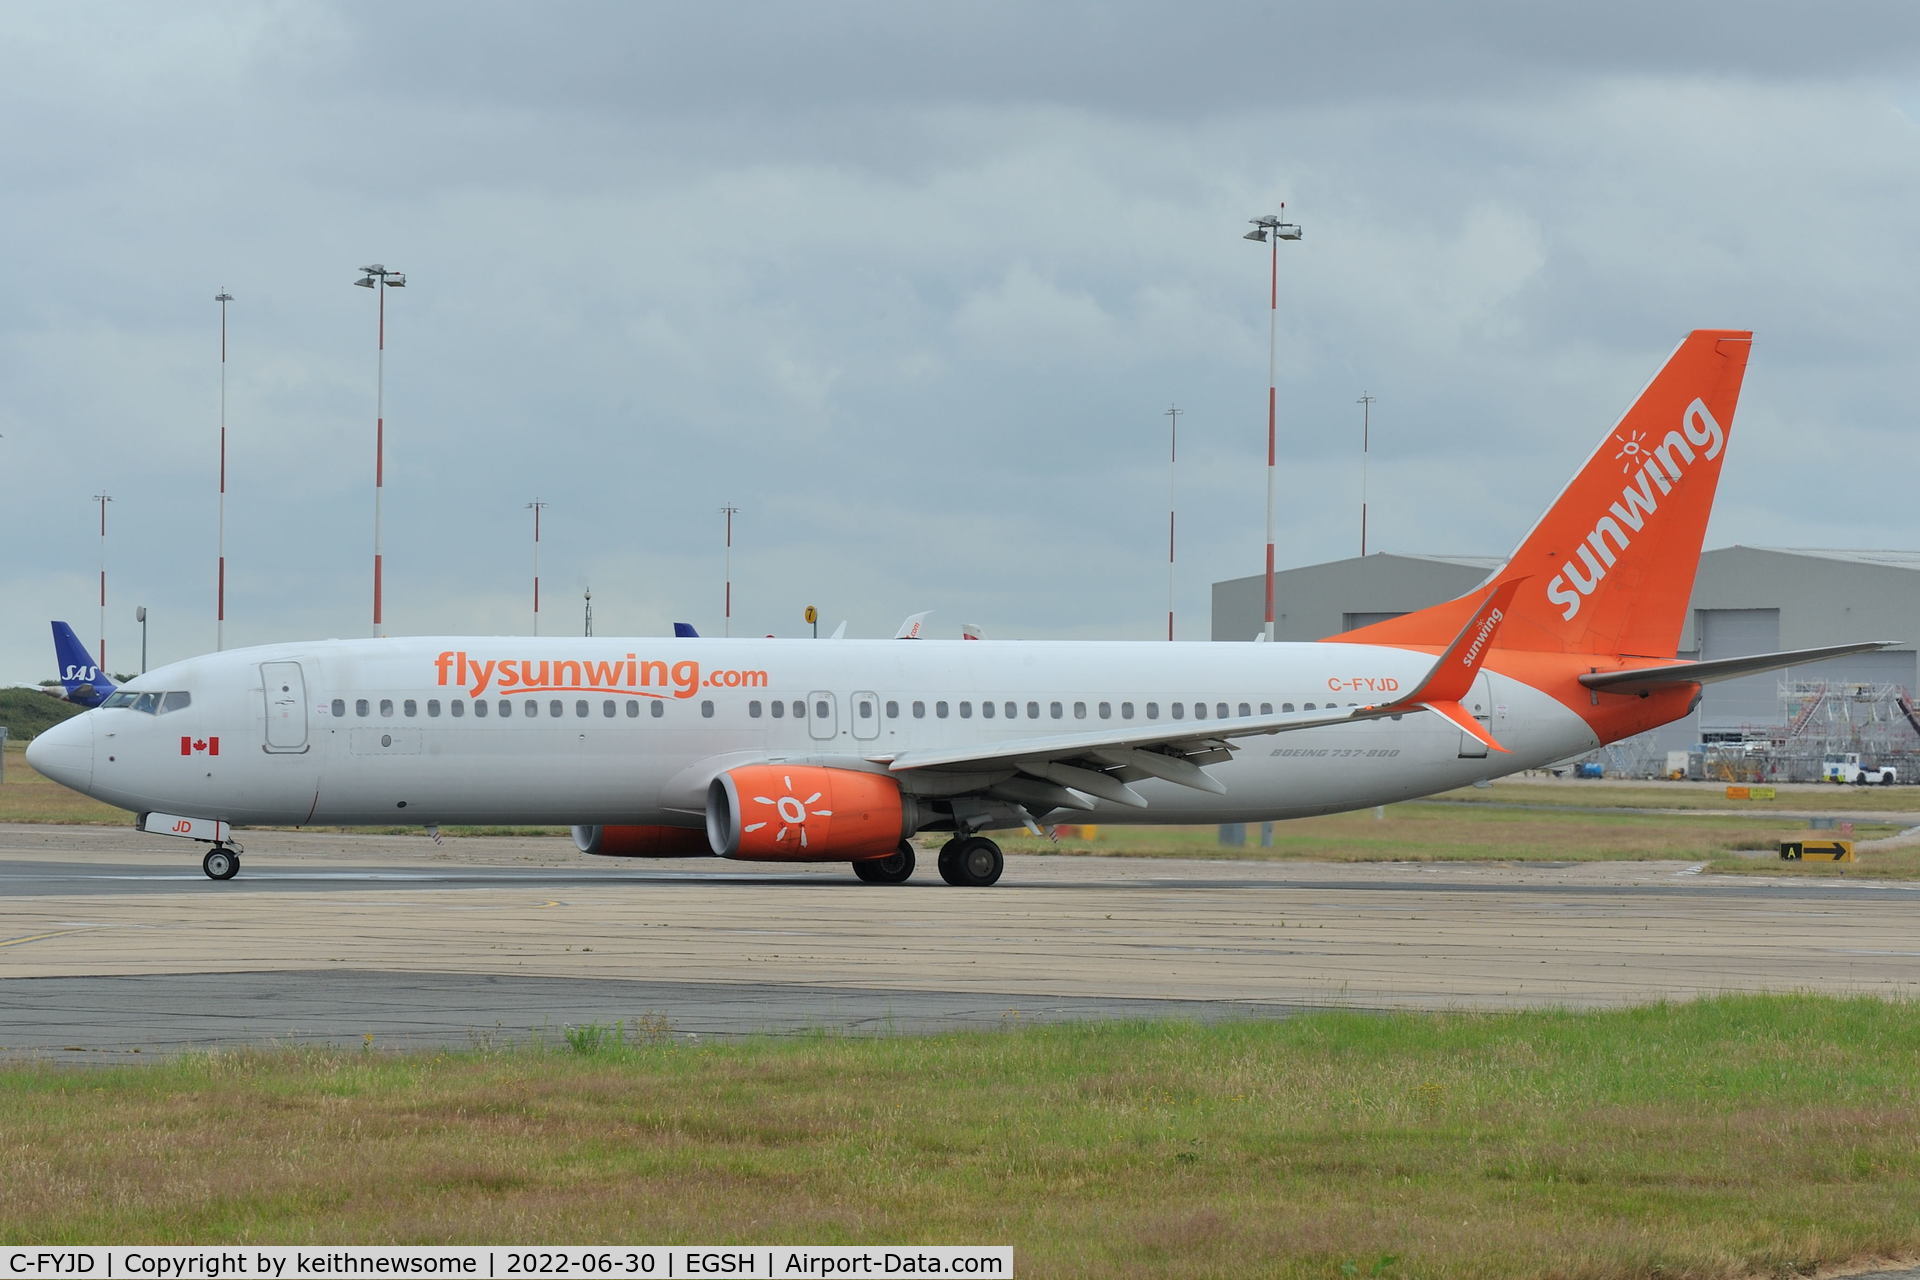 C-FYJD, 2015 Boeing 737-8Q8 C/N 41807, Leaving Norwich for Pafos.